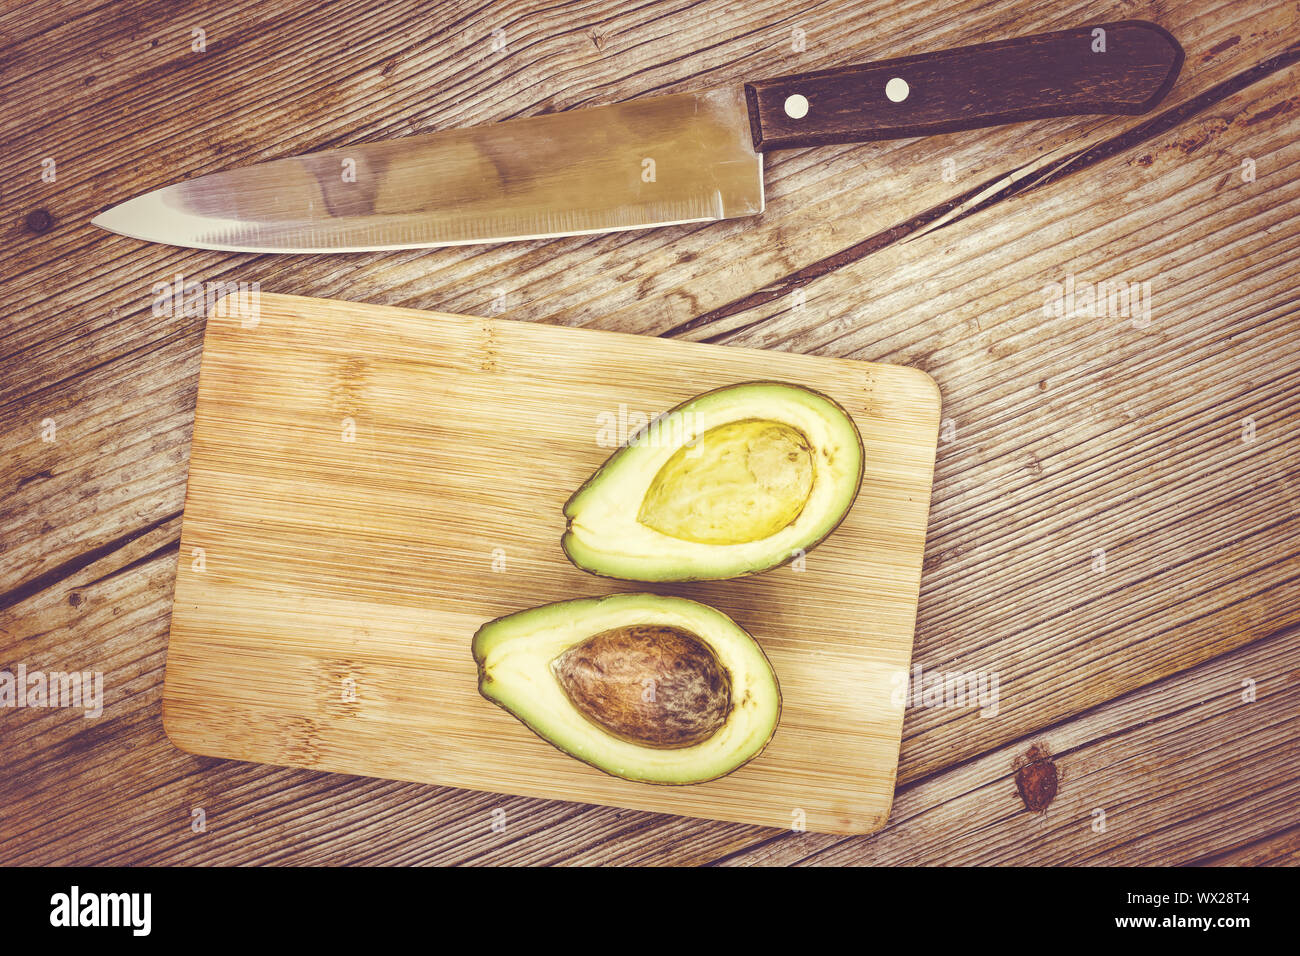 Avocado, cut into avocados, in half, healthy food, cooking, cutting board, Spanish product Stock Photo